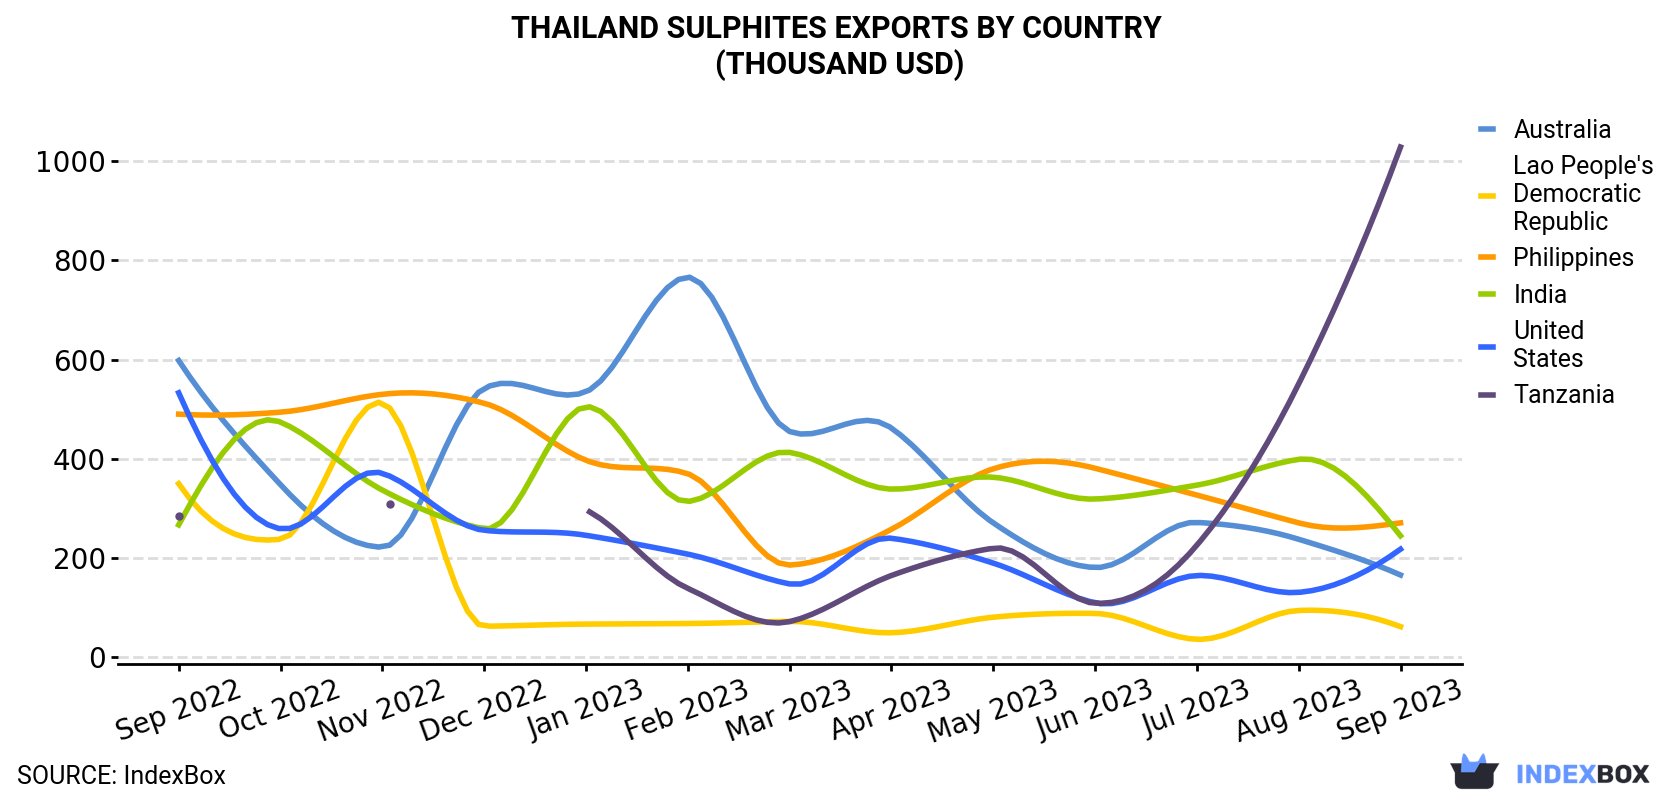 Thailand Sulphites Exports By Country (Thousand USD)